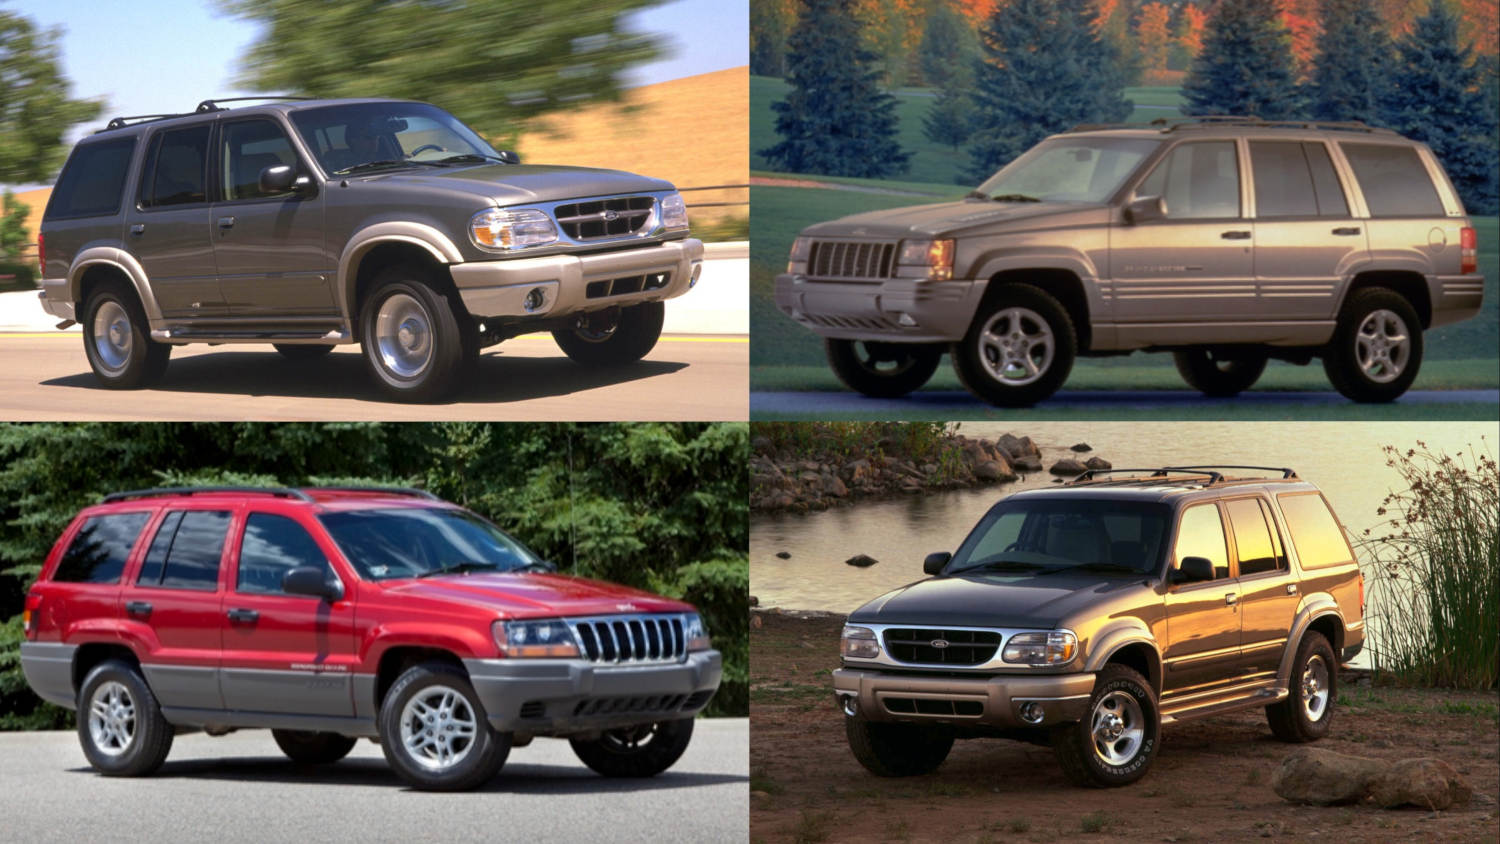 The best selling SUVs of the Y2K 2000 era seen here are still best-sellers in 2023